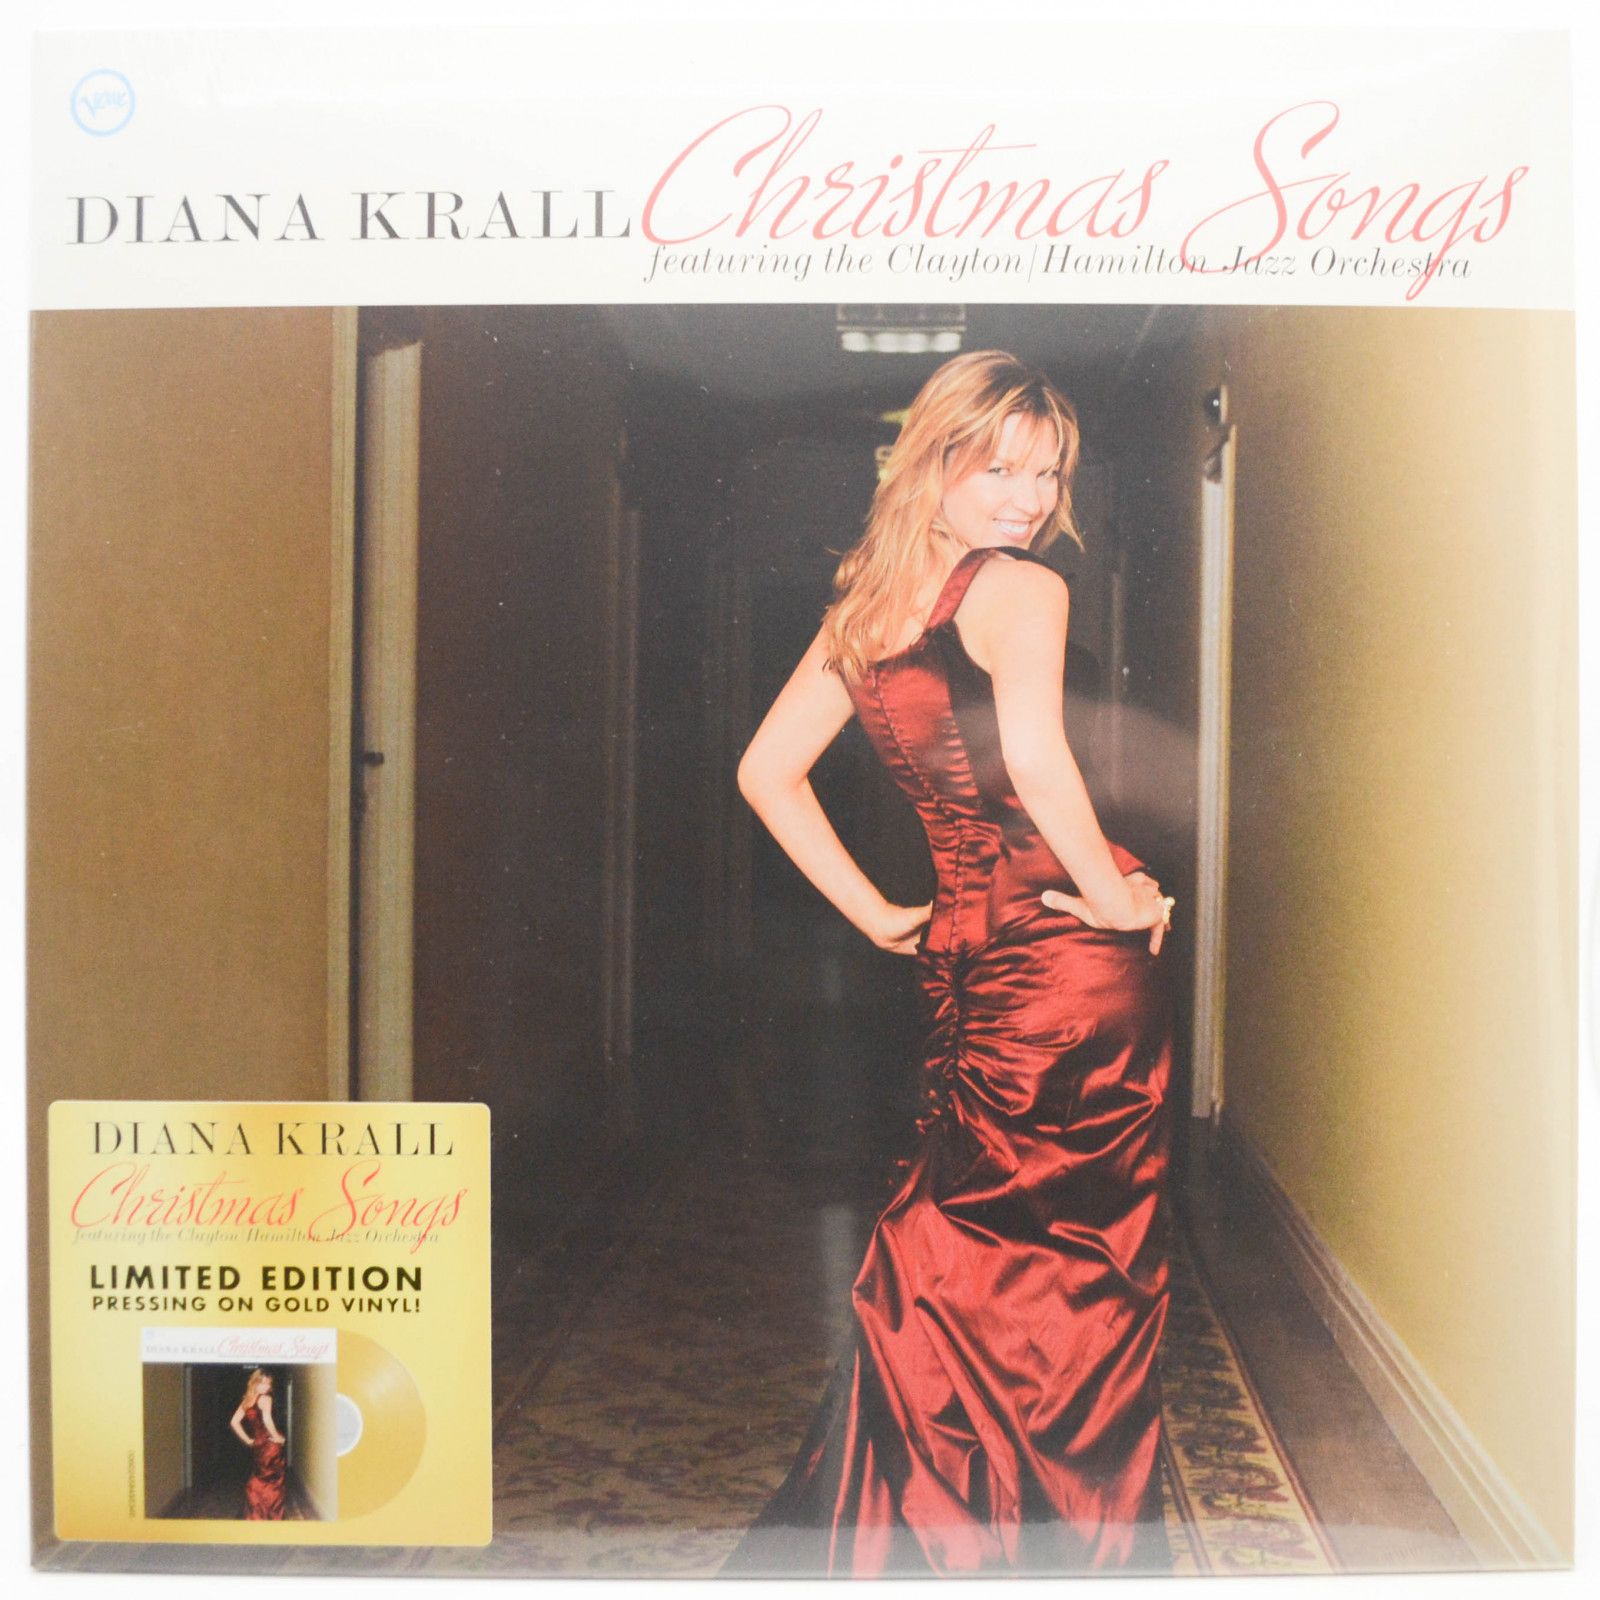 Diana Krall Featuring The Clayton-Hamilton Jazz Orchestra — Christmas Songs, 2005